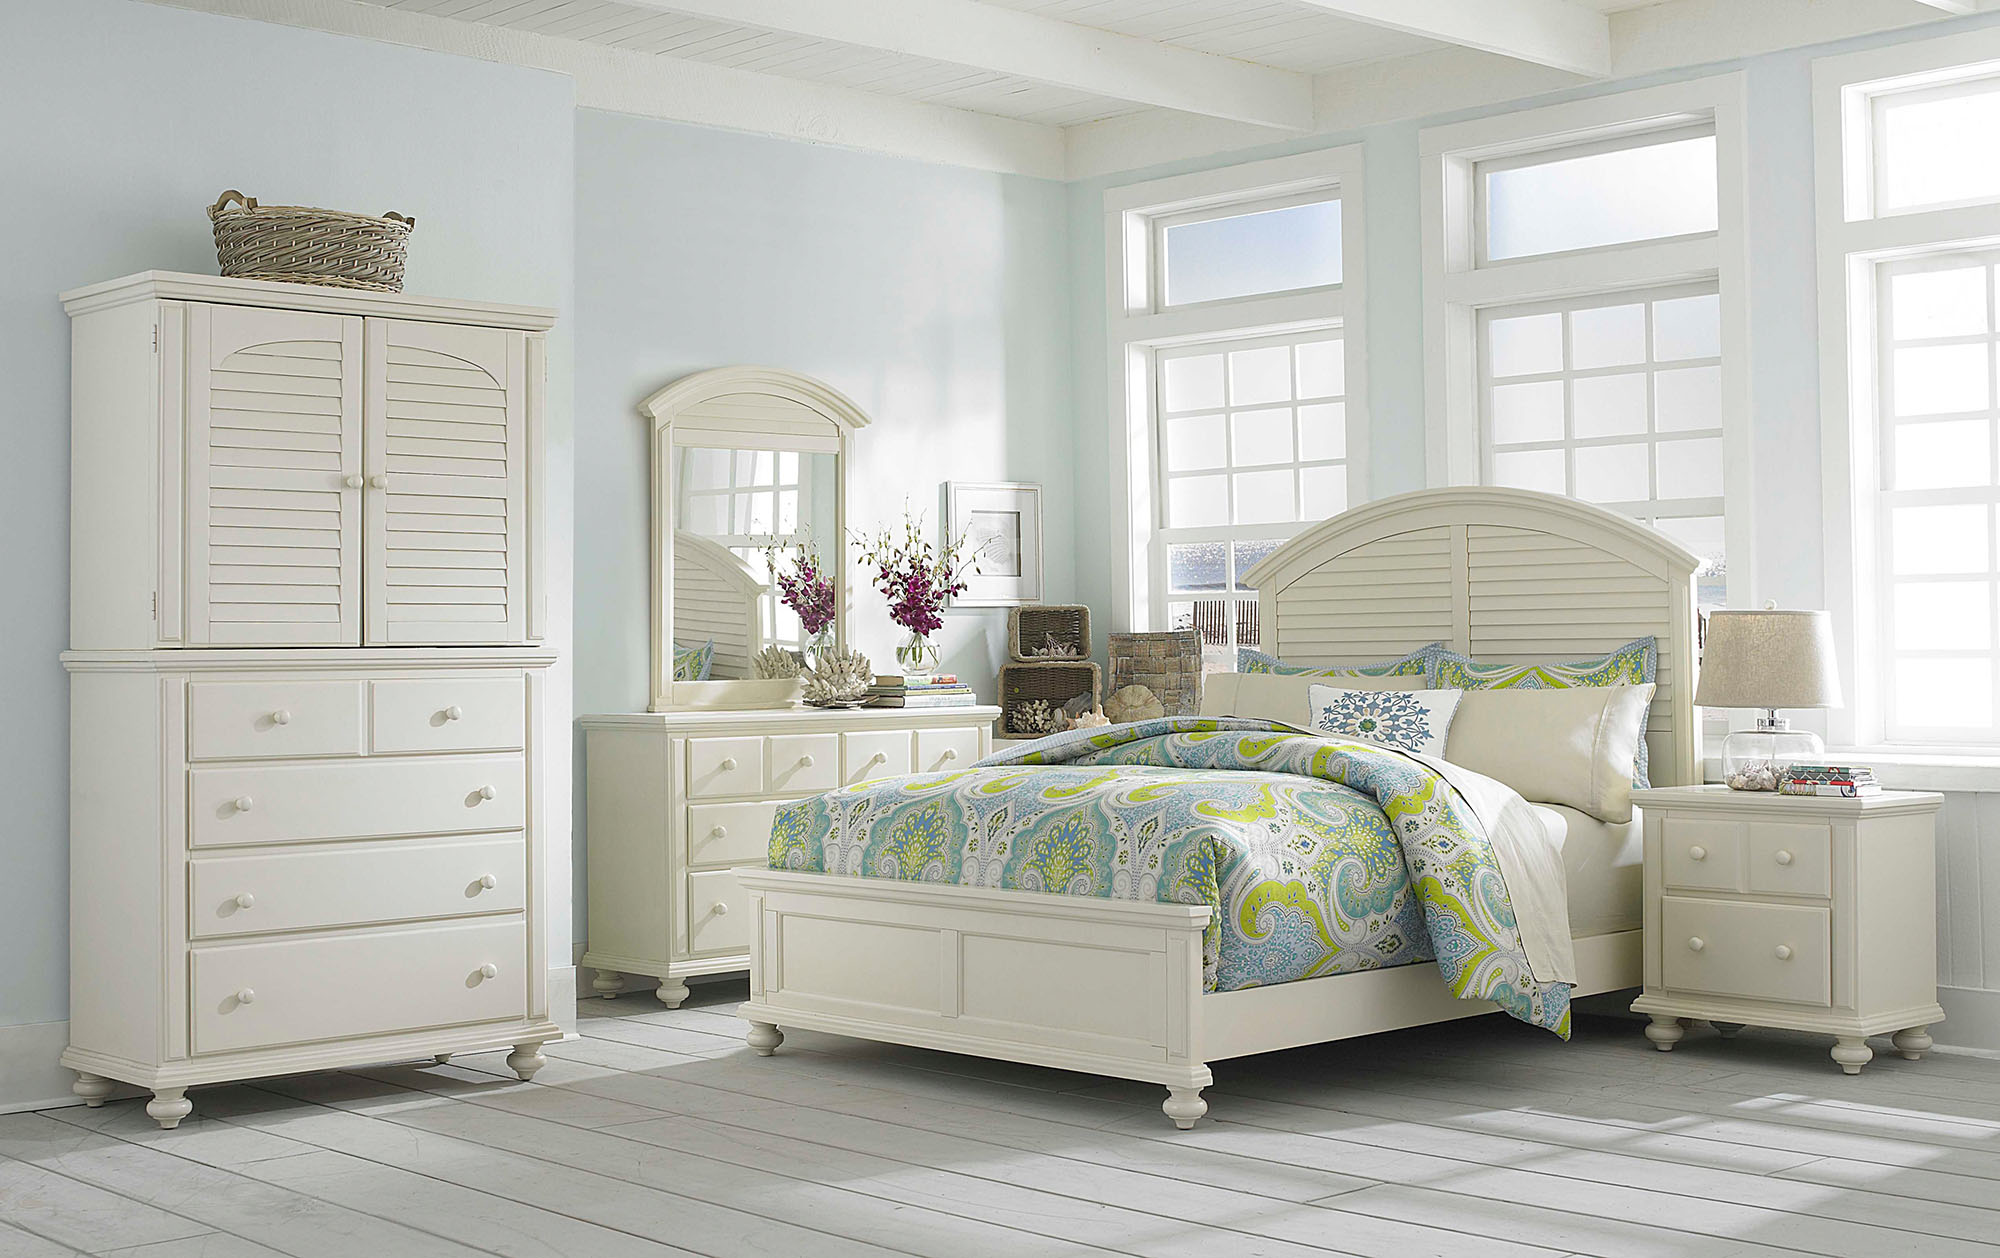 Seabrooke Bedroom By Broyhill